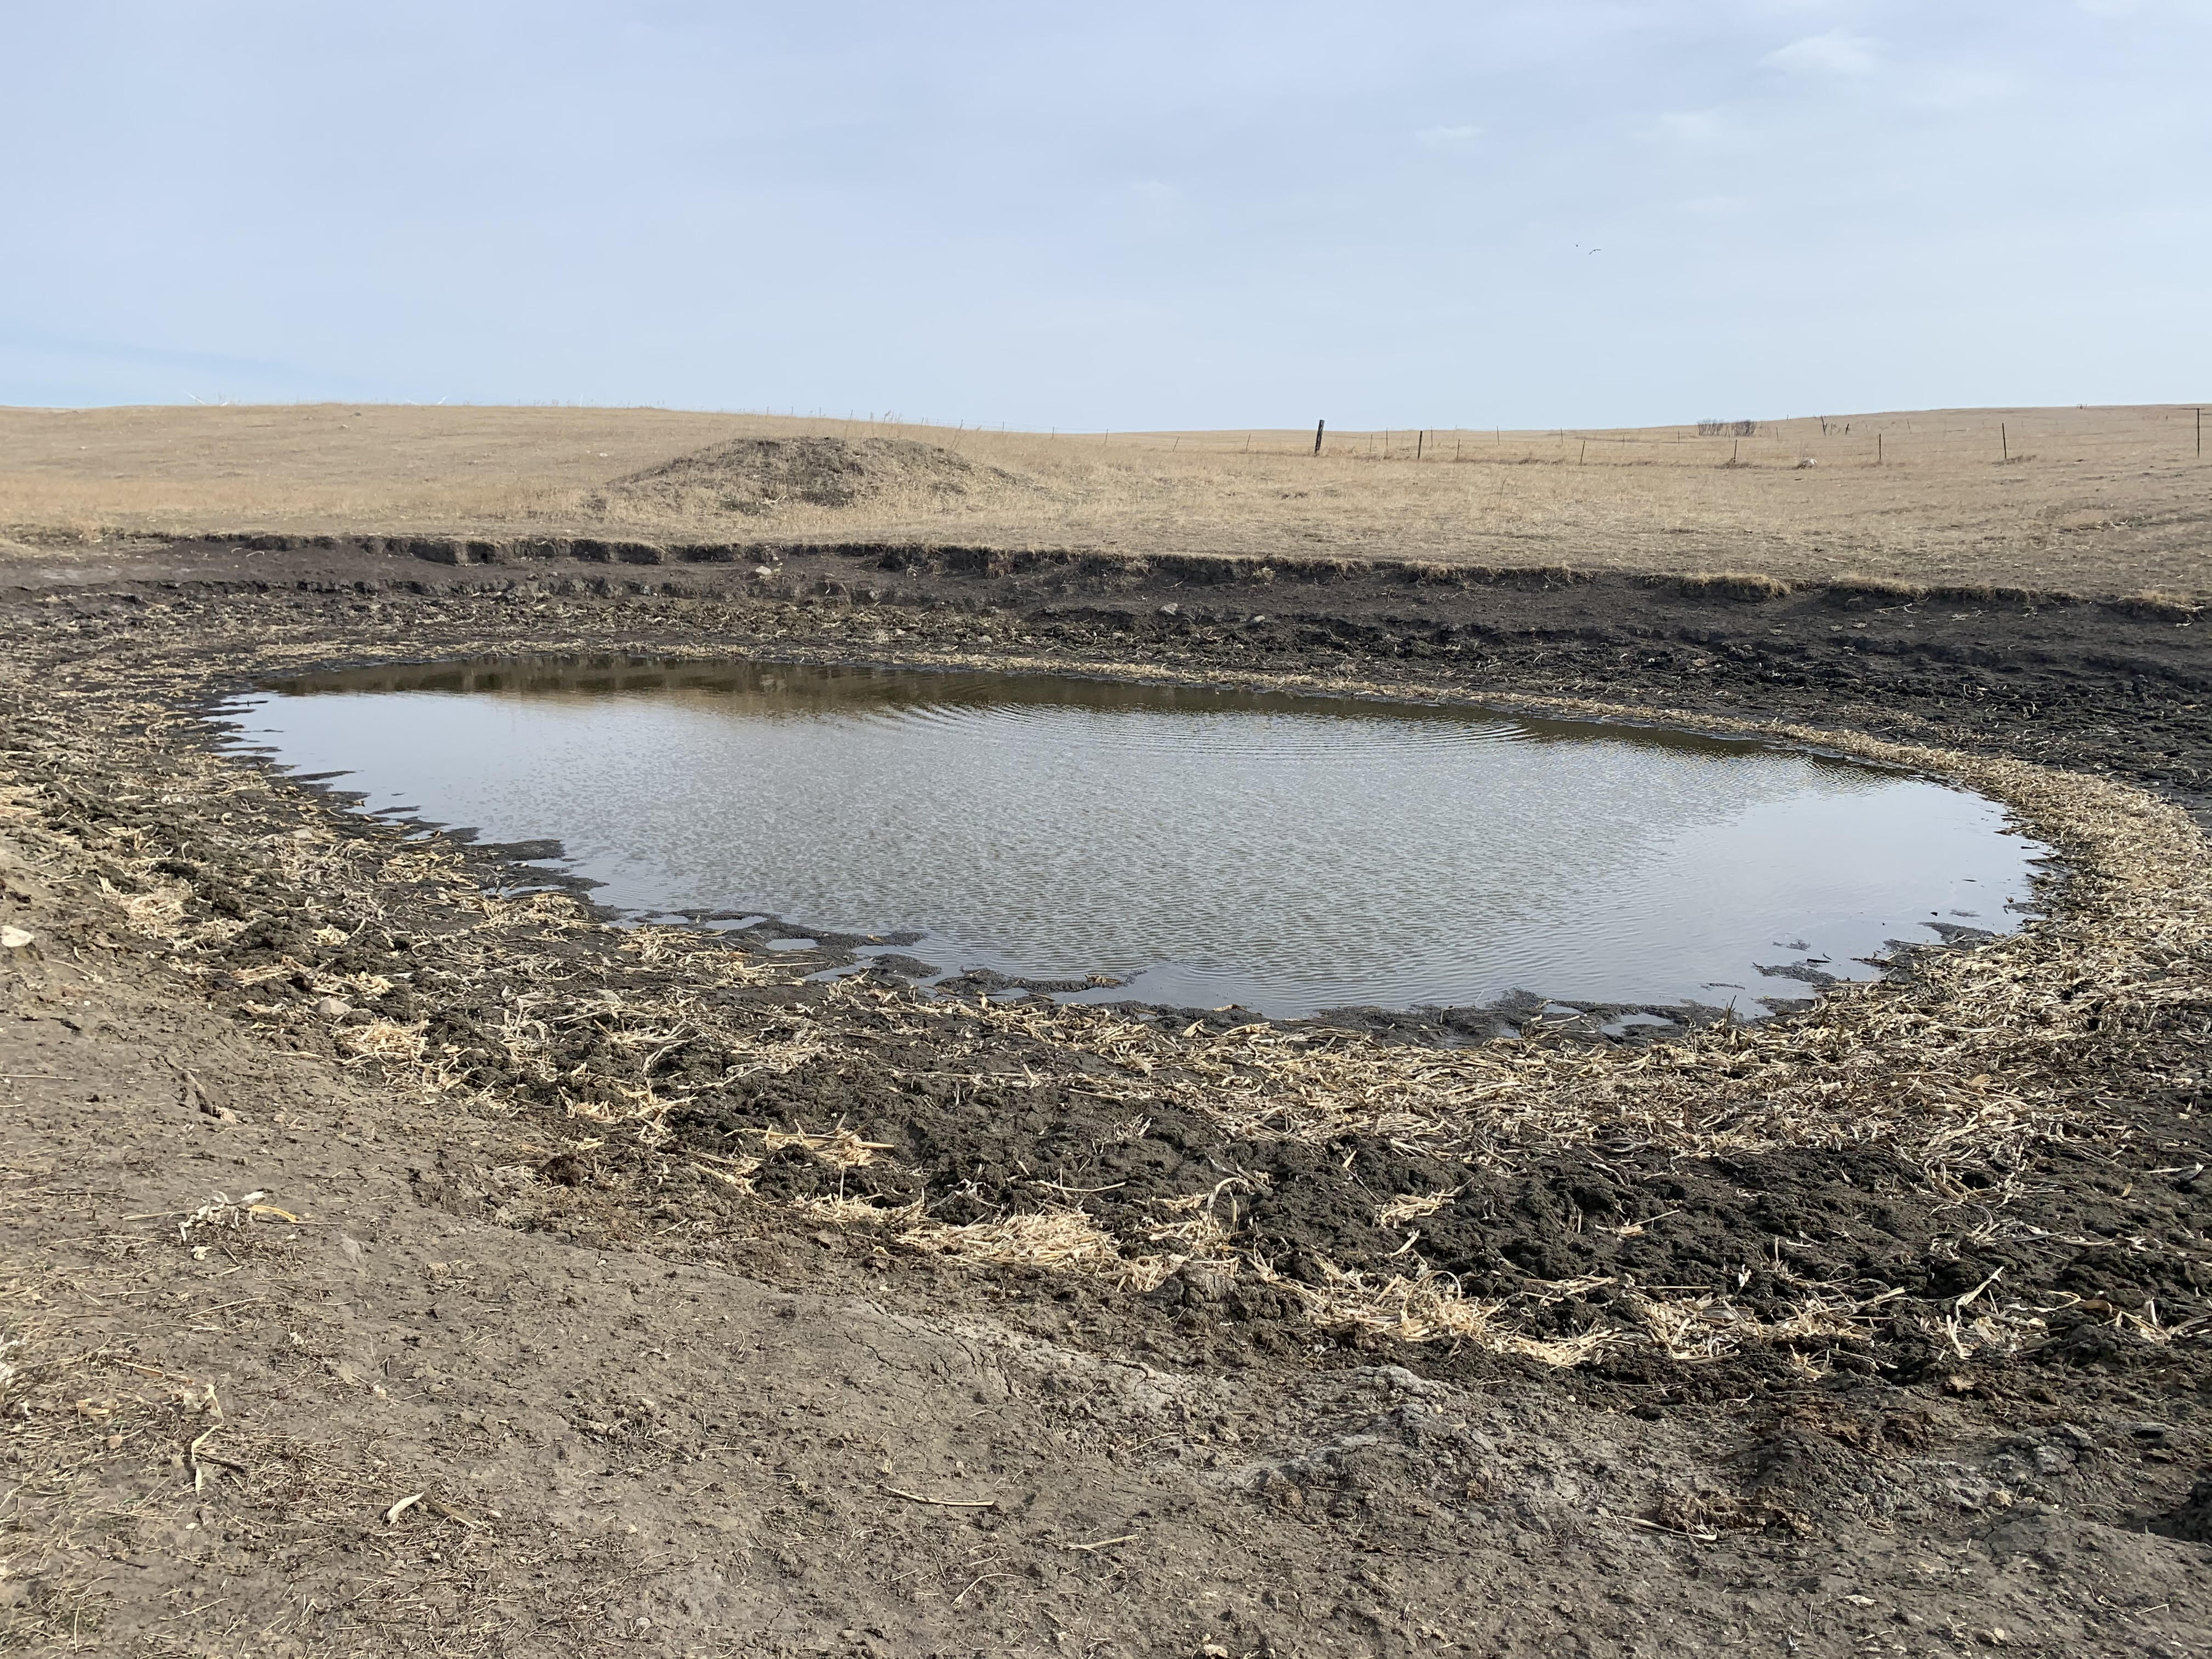 Morning Ag News, June 22, 2021: Researcher calls current dry conditions "mega-drought"